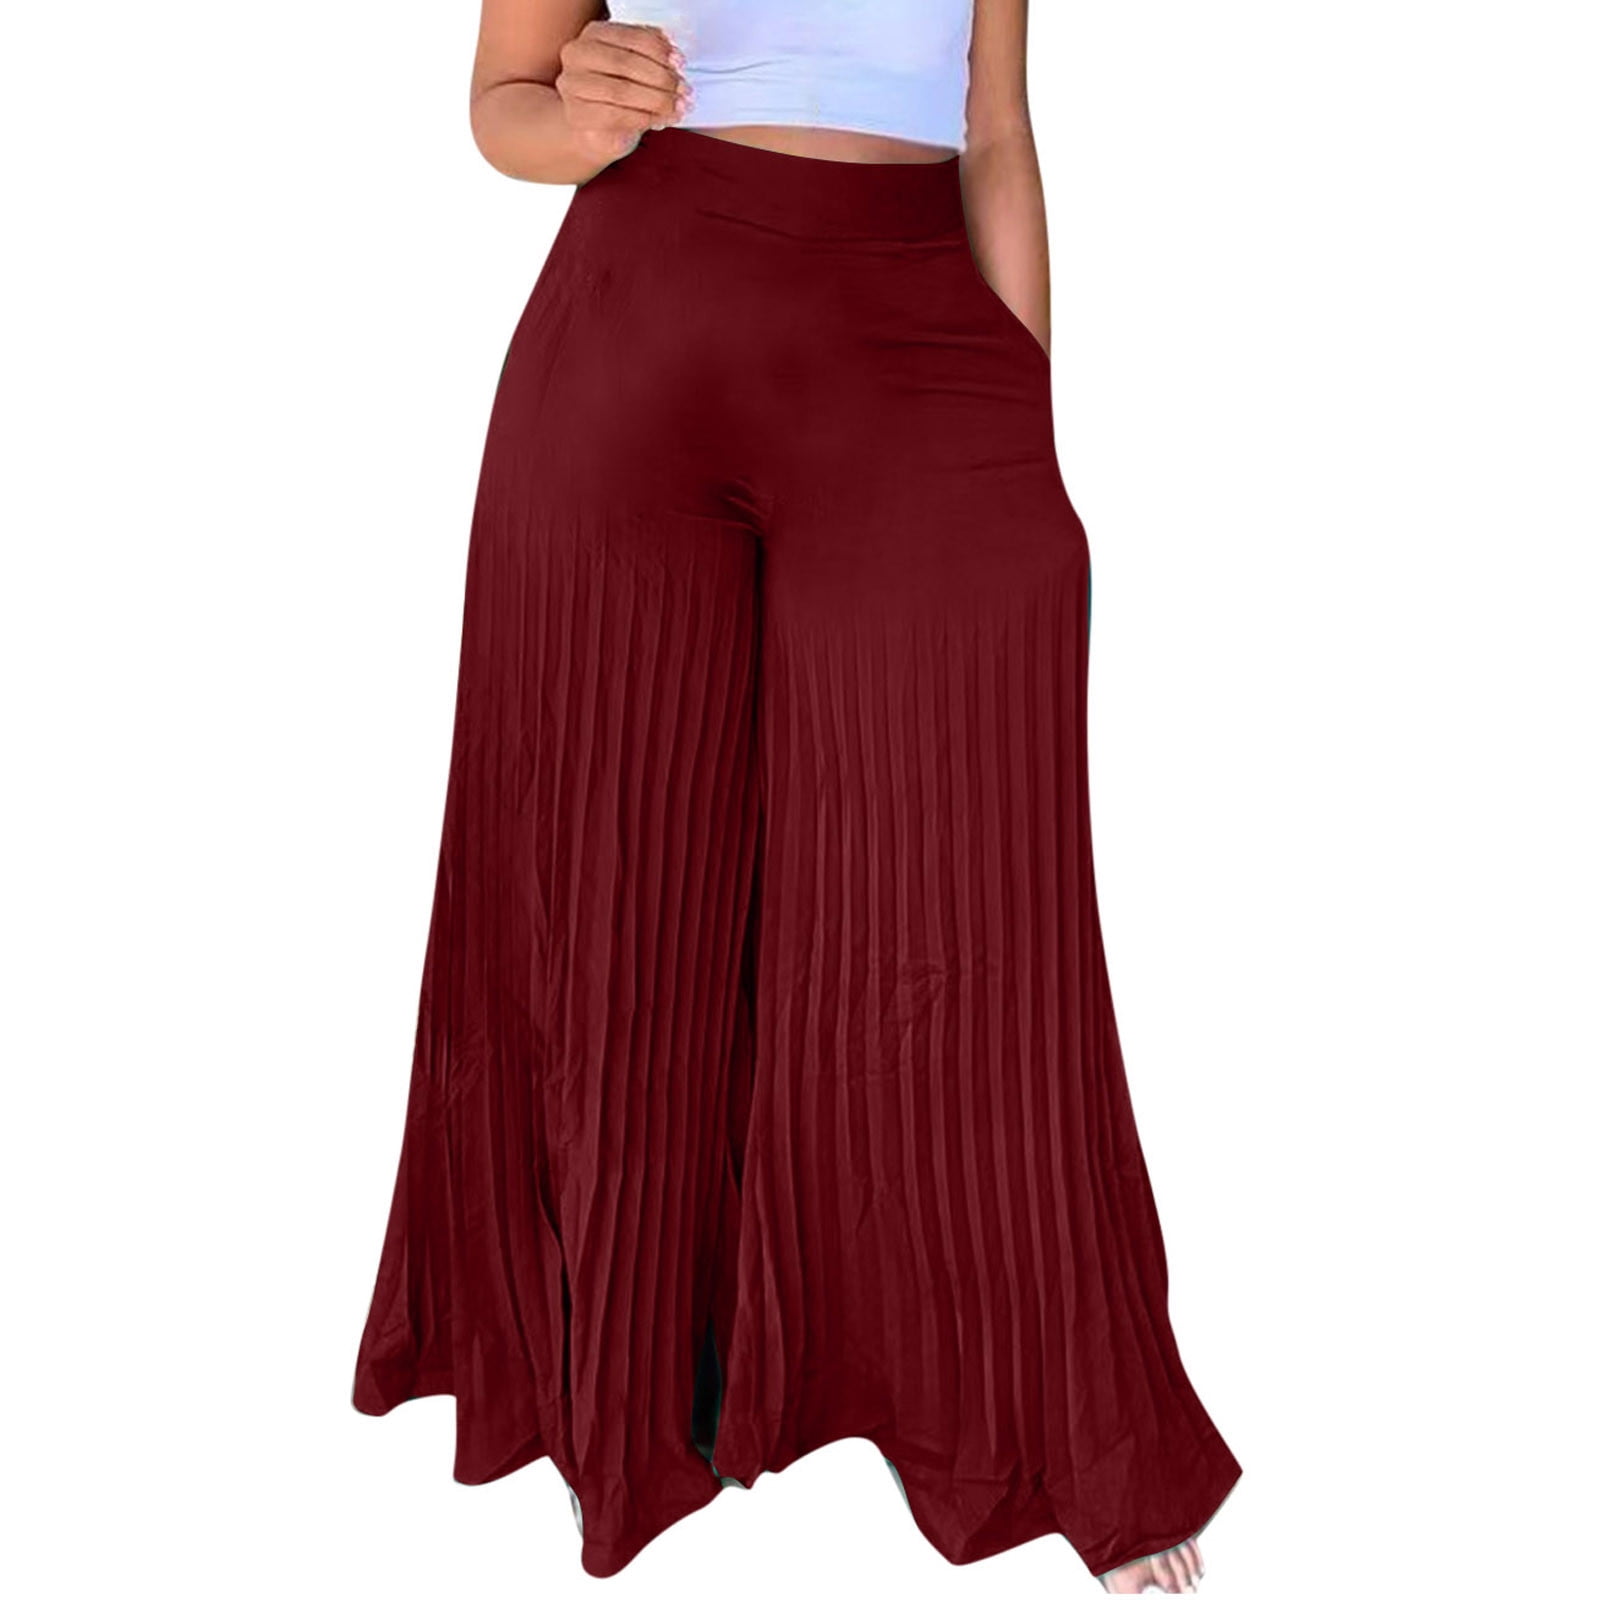 NIMIN Womens High Waisted Corduroy Pants Slim Fit Business Casual Pants  Vintage Flare Pants with Pockets Khaki Small at  Women's Clothing  store